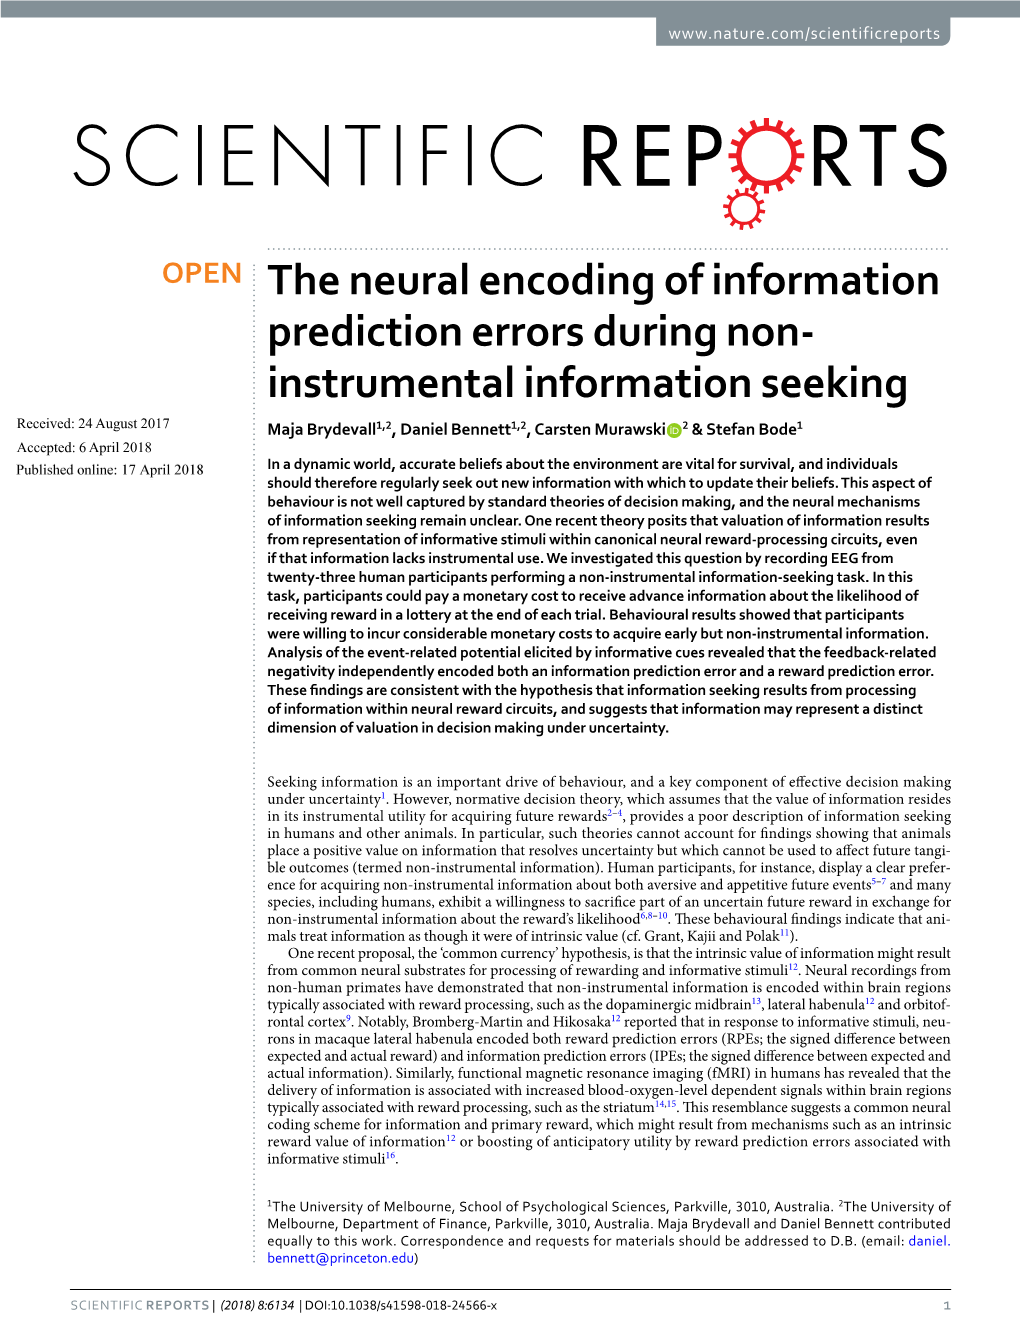 The Neural Encoding of Information Prediction Errors During Non